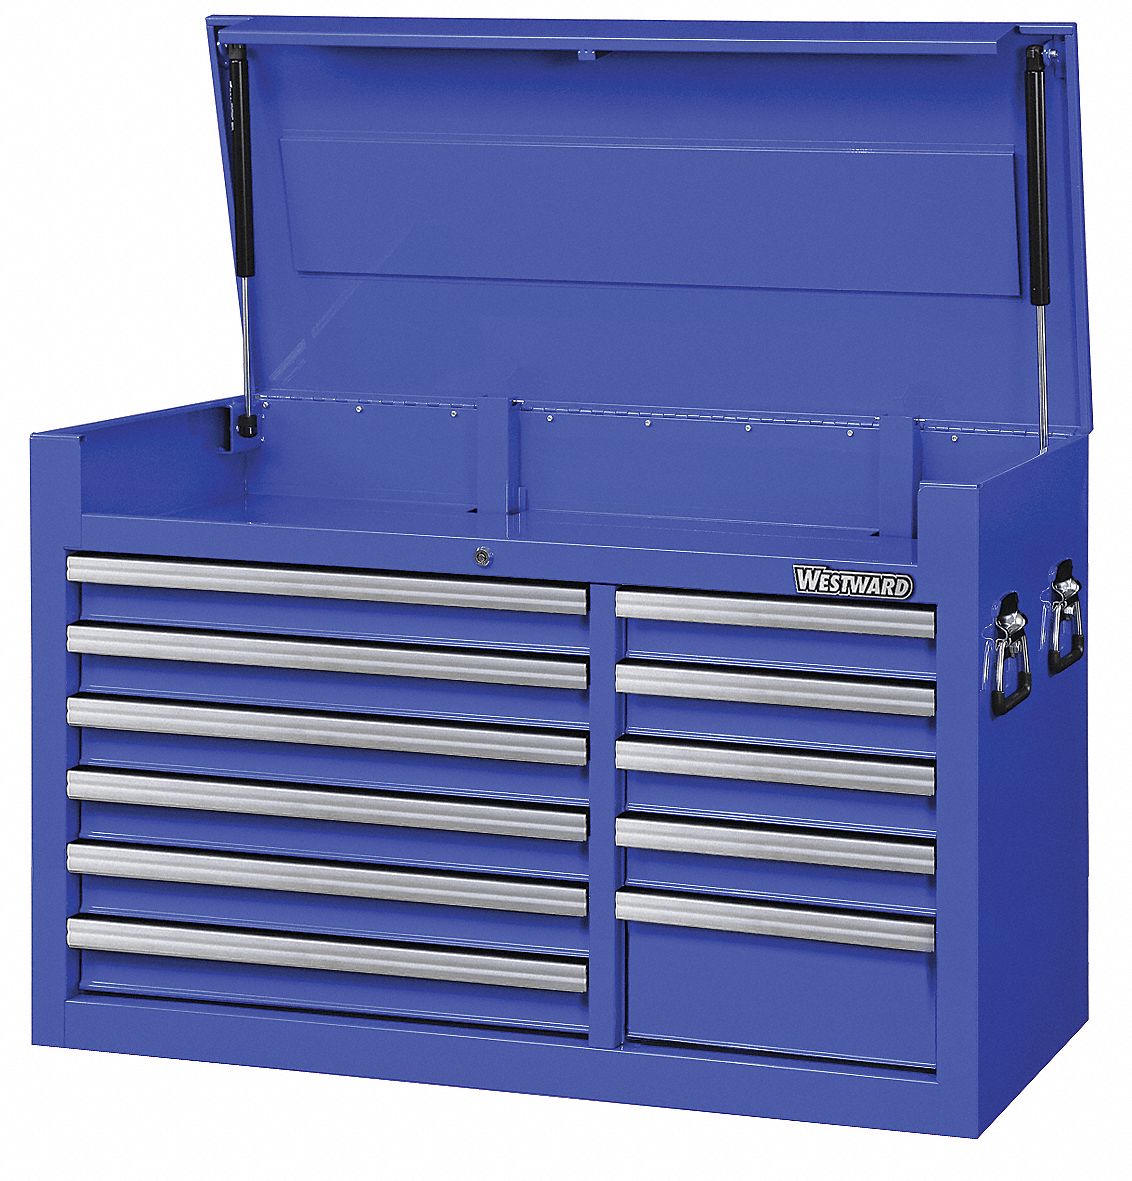 32H841 - G7162 Top Chest 41-7/16x18-5/8x26-7/8 in. Blue